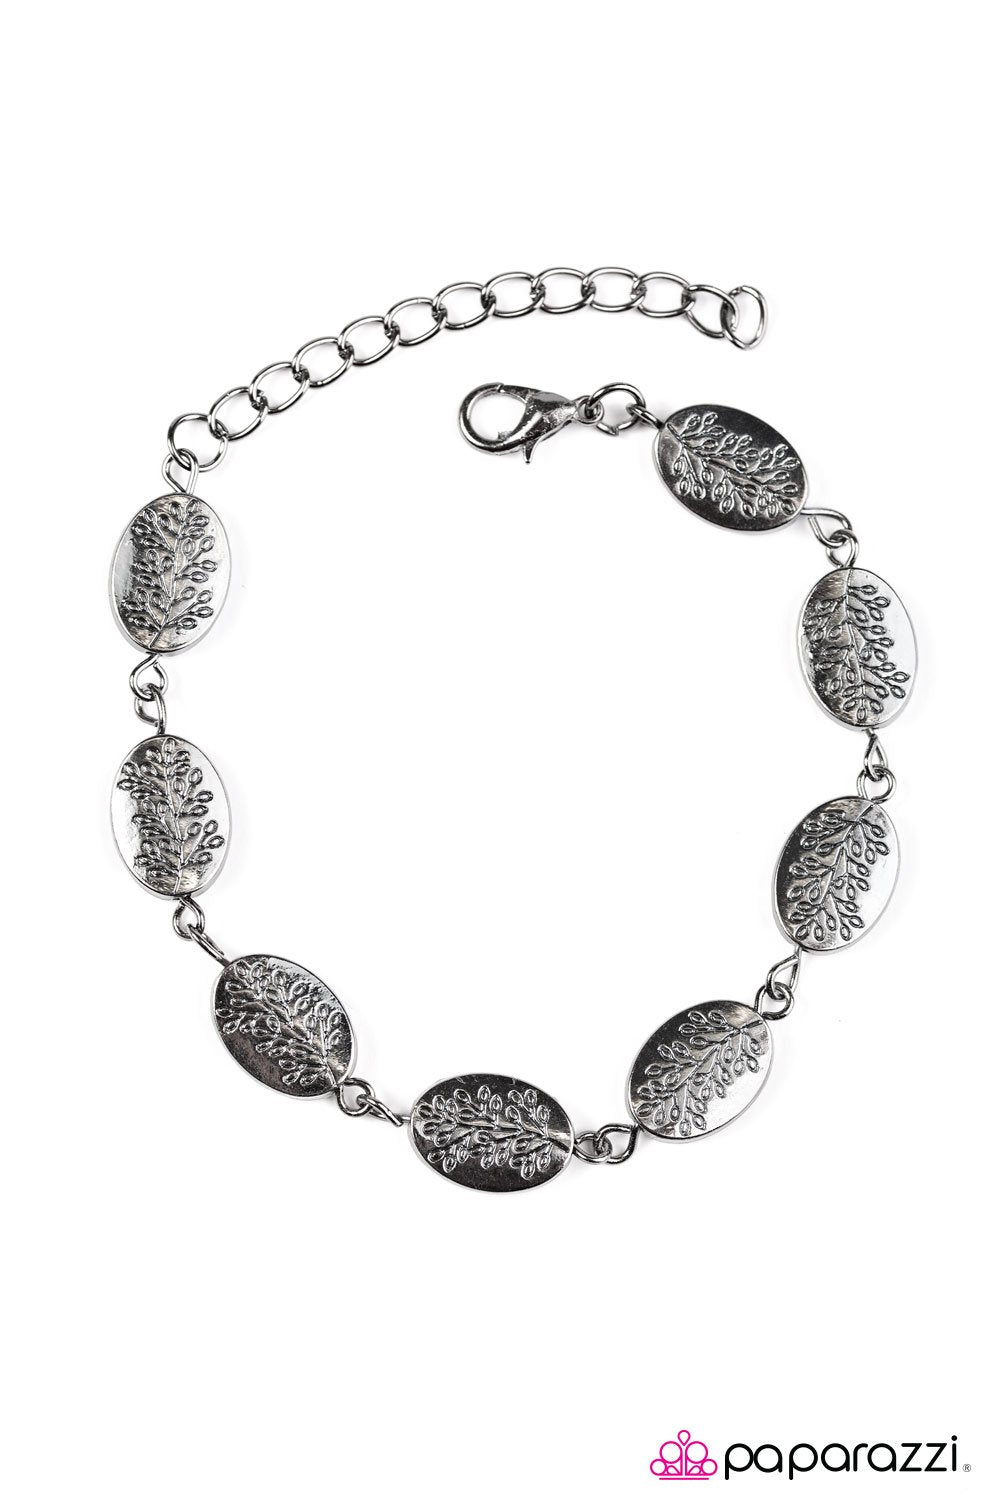 Good Things Come In Trees Gunmetal Black Bracelet - Paparazzi Accessories-CarasShop.com - $5 Jewelry by Cara Jewels